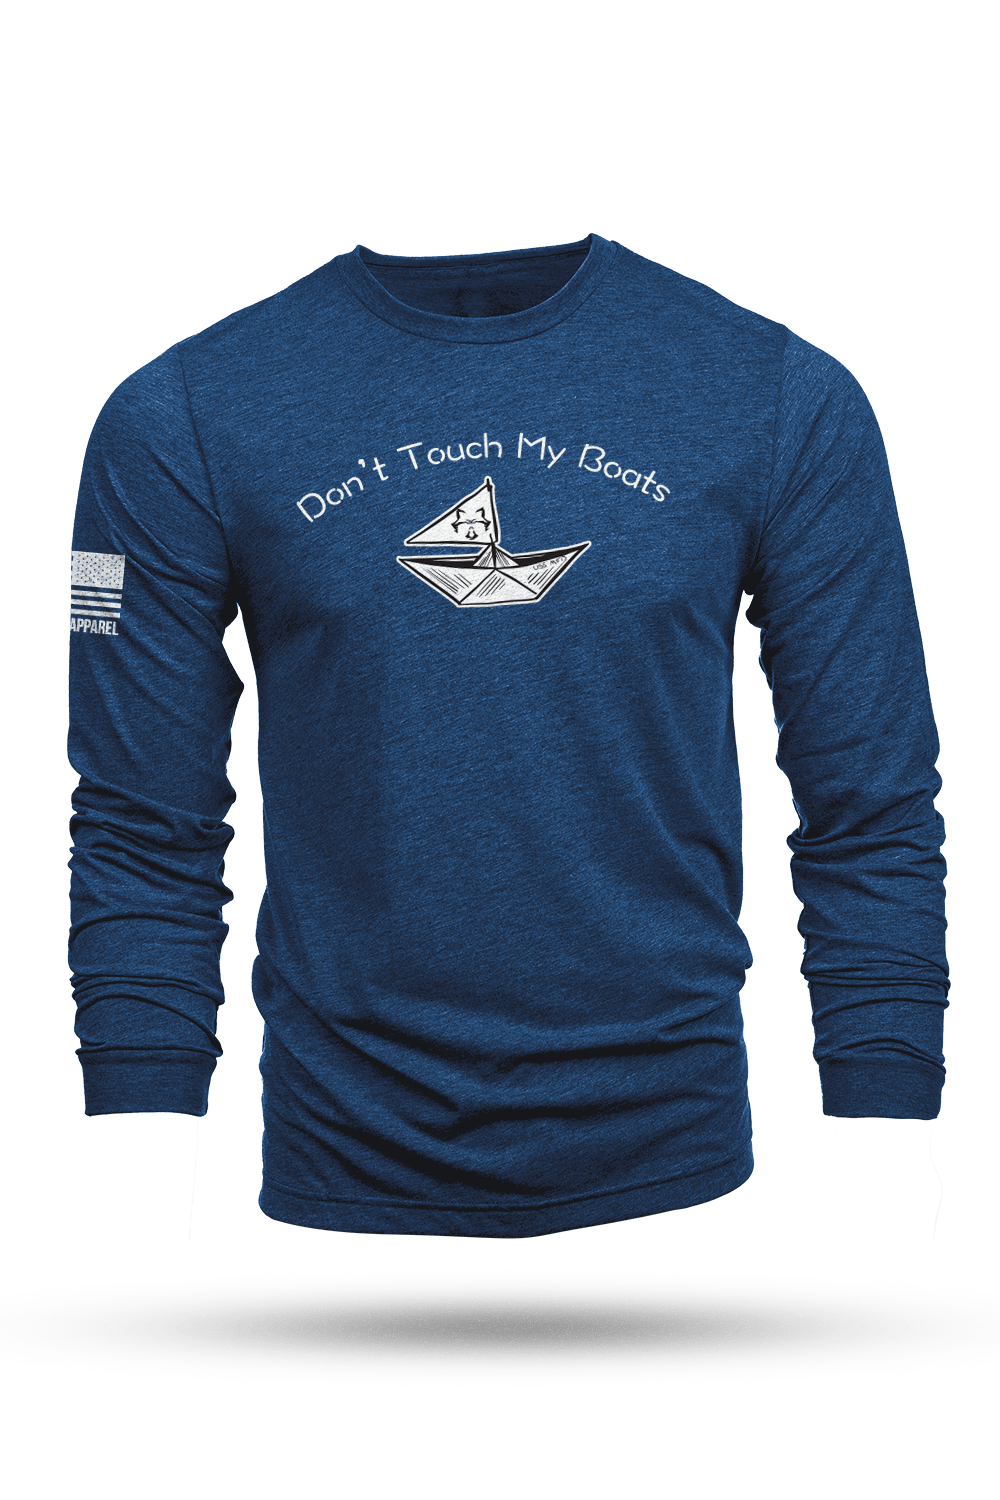 Long-Sleeve Shirt - Don't Touch My Boats